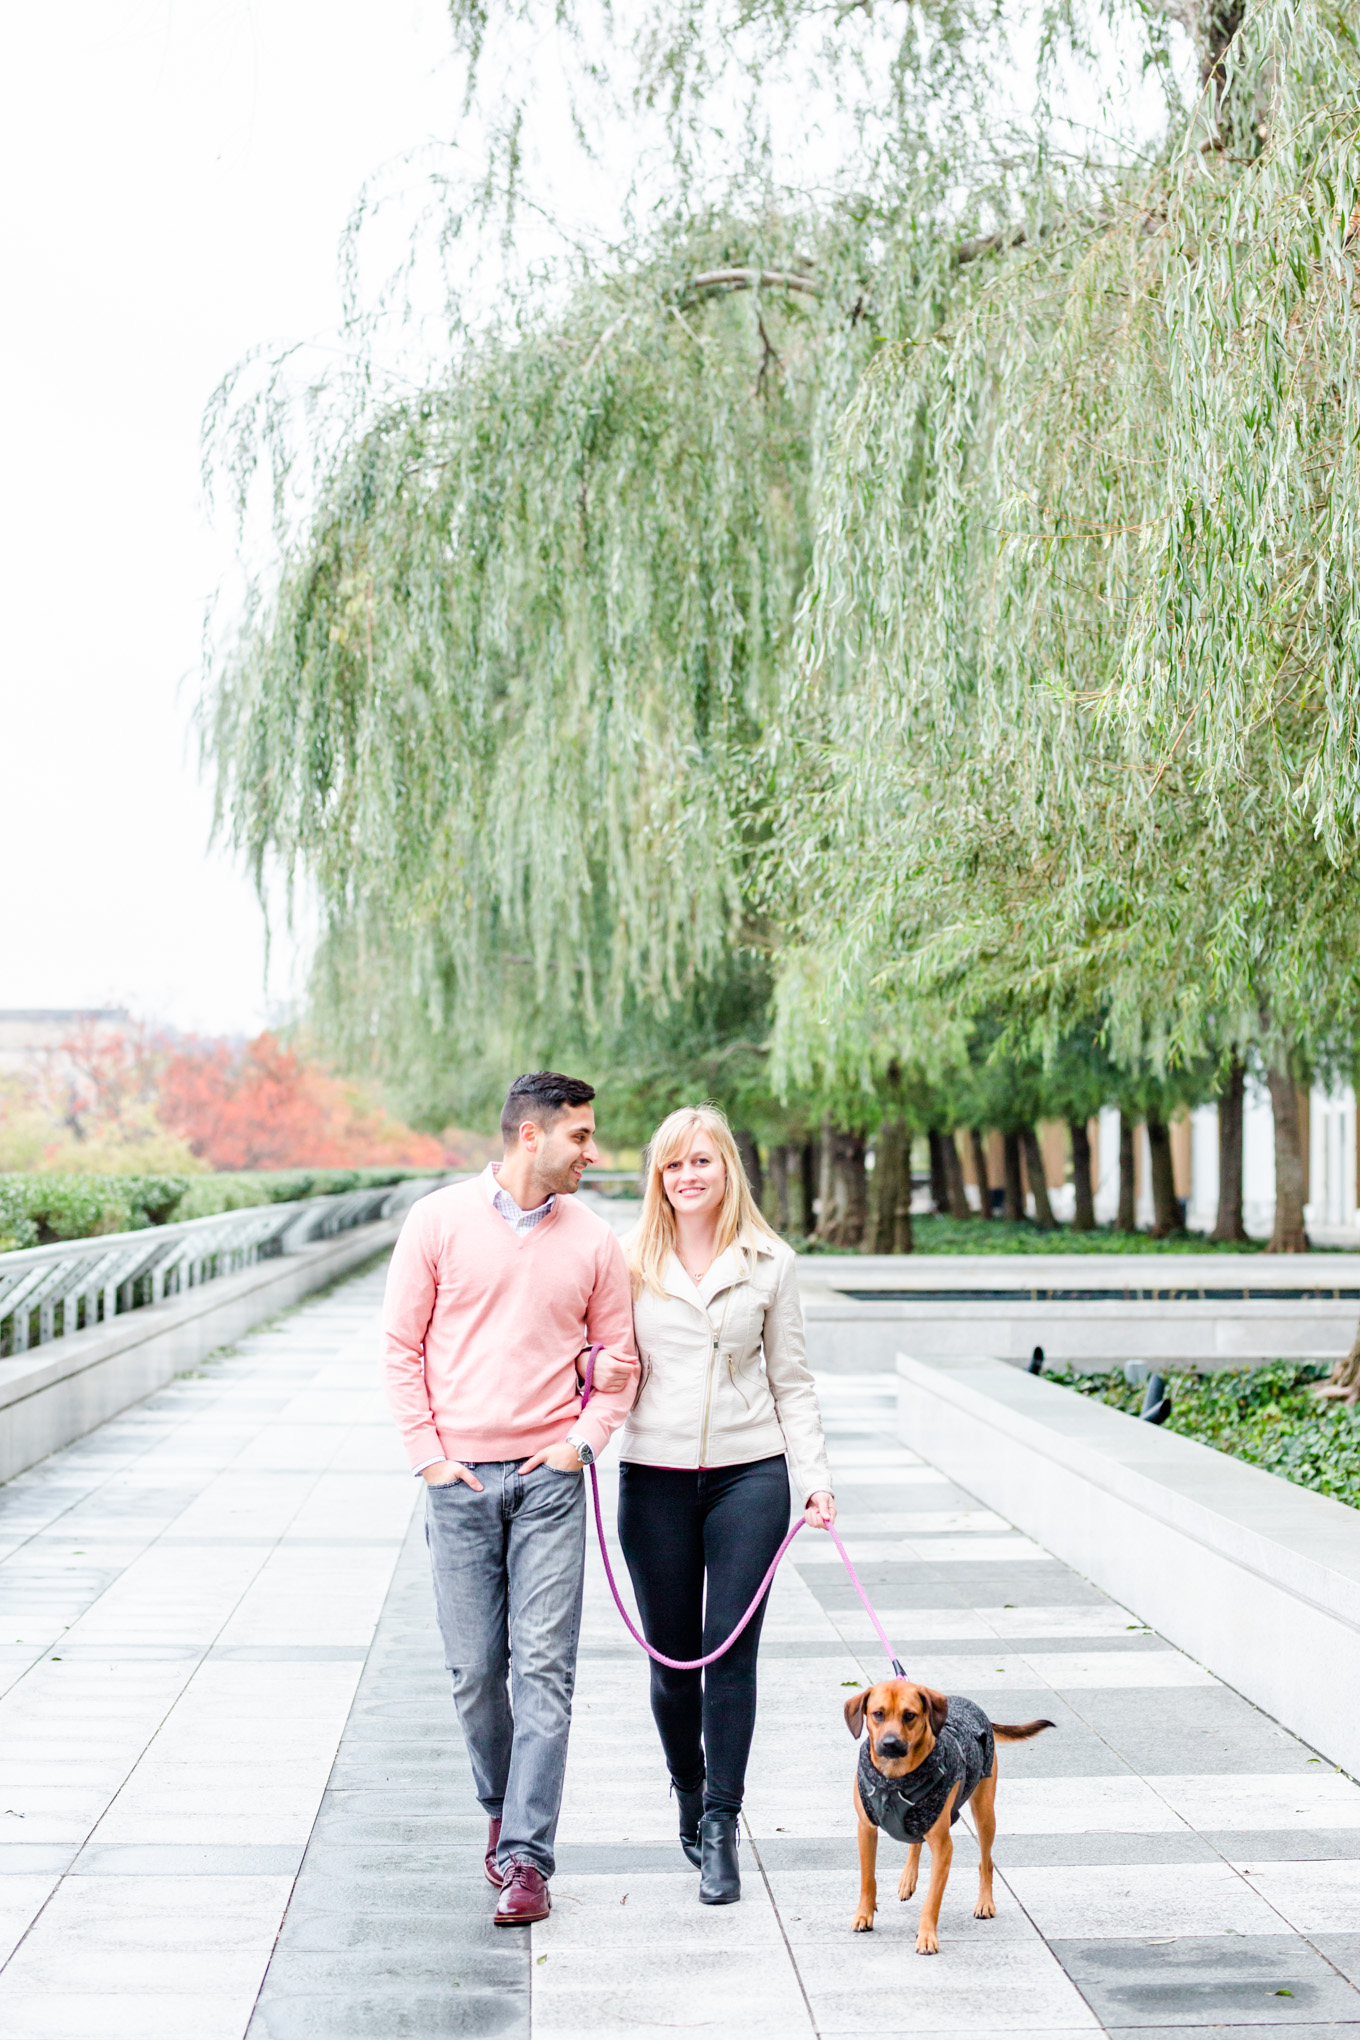 autumn Kennedy Center engagement photos, Kennedy Center portraits, Kennedy Center D.C., D.C. engagement photos, cloudy day portraits, D.C. engagement photographer, D.C. wedding photographer, D.C. wedding photography, D.C. engagement photography, classic engagement photos, Rachel E.H. Photography, autumn engagement photos, couple walking with dog, willow trees